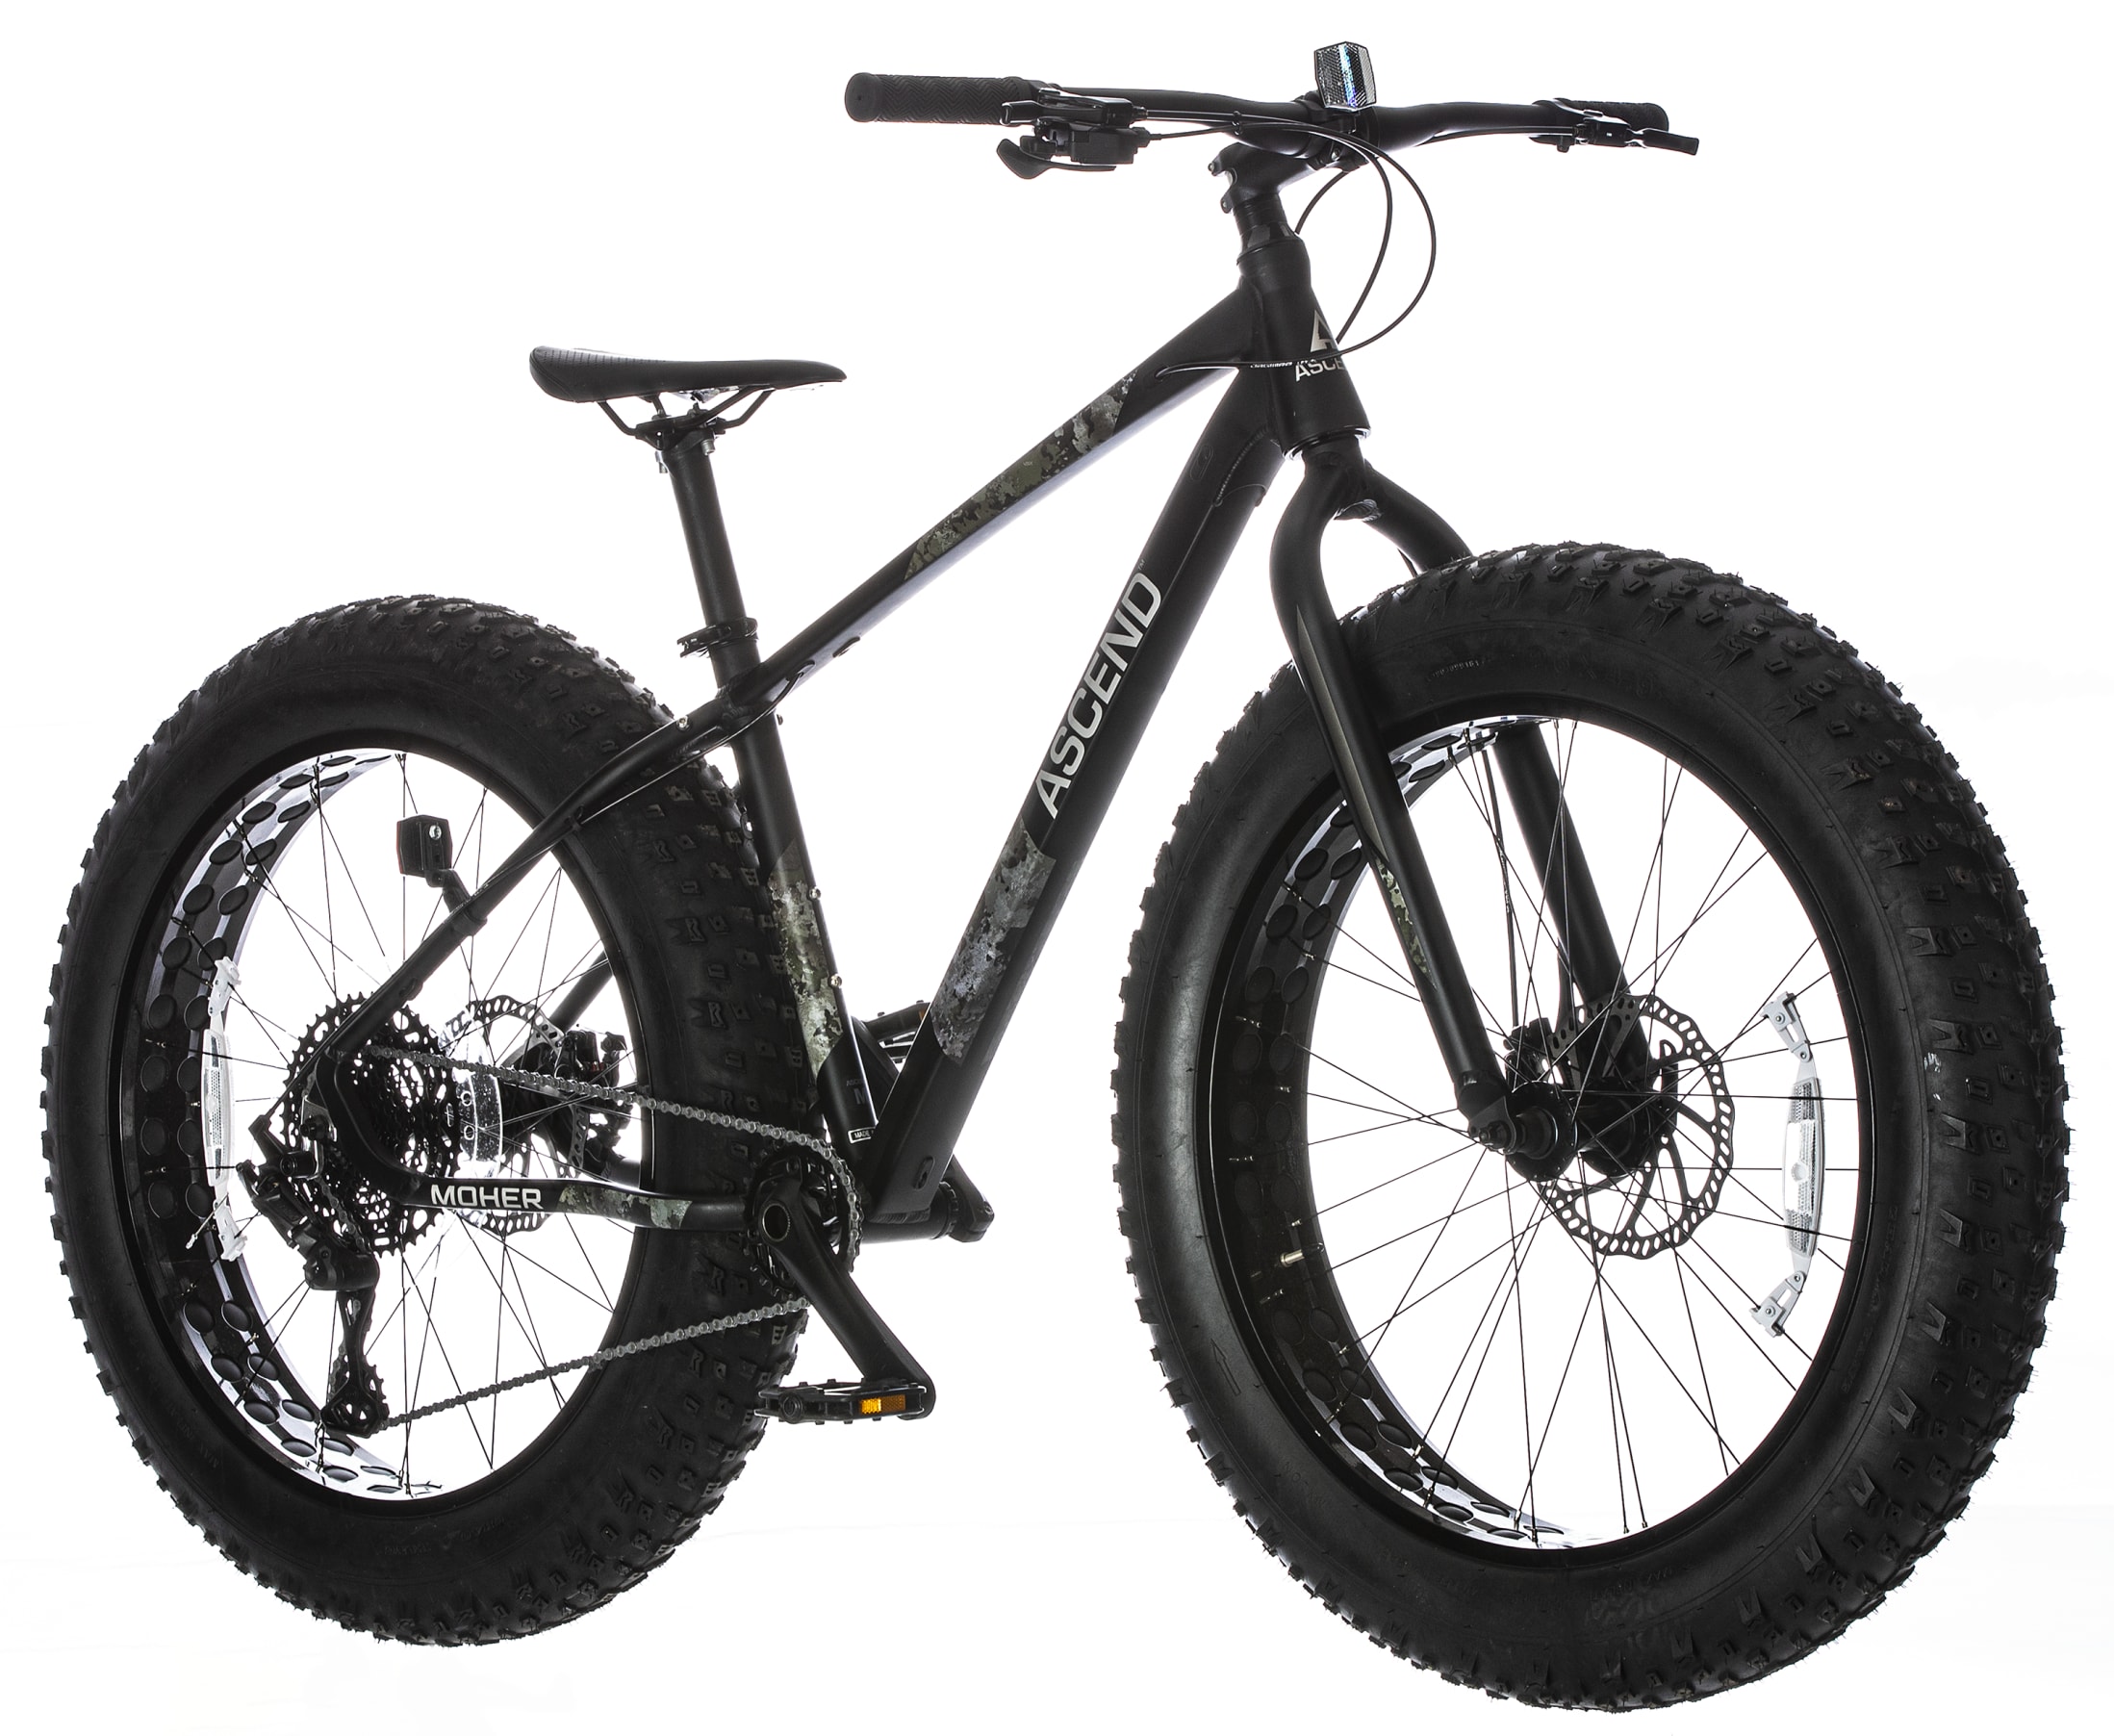 Ascend Moher fat tire mountain bike from Cabelas and Bass Pro Shops